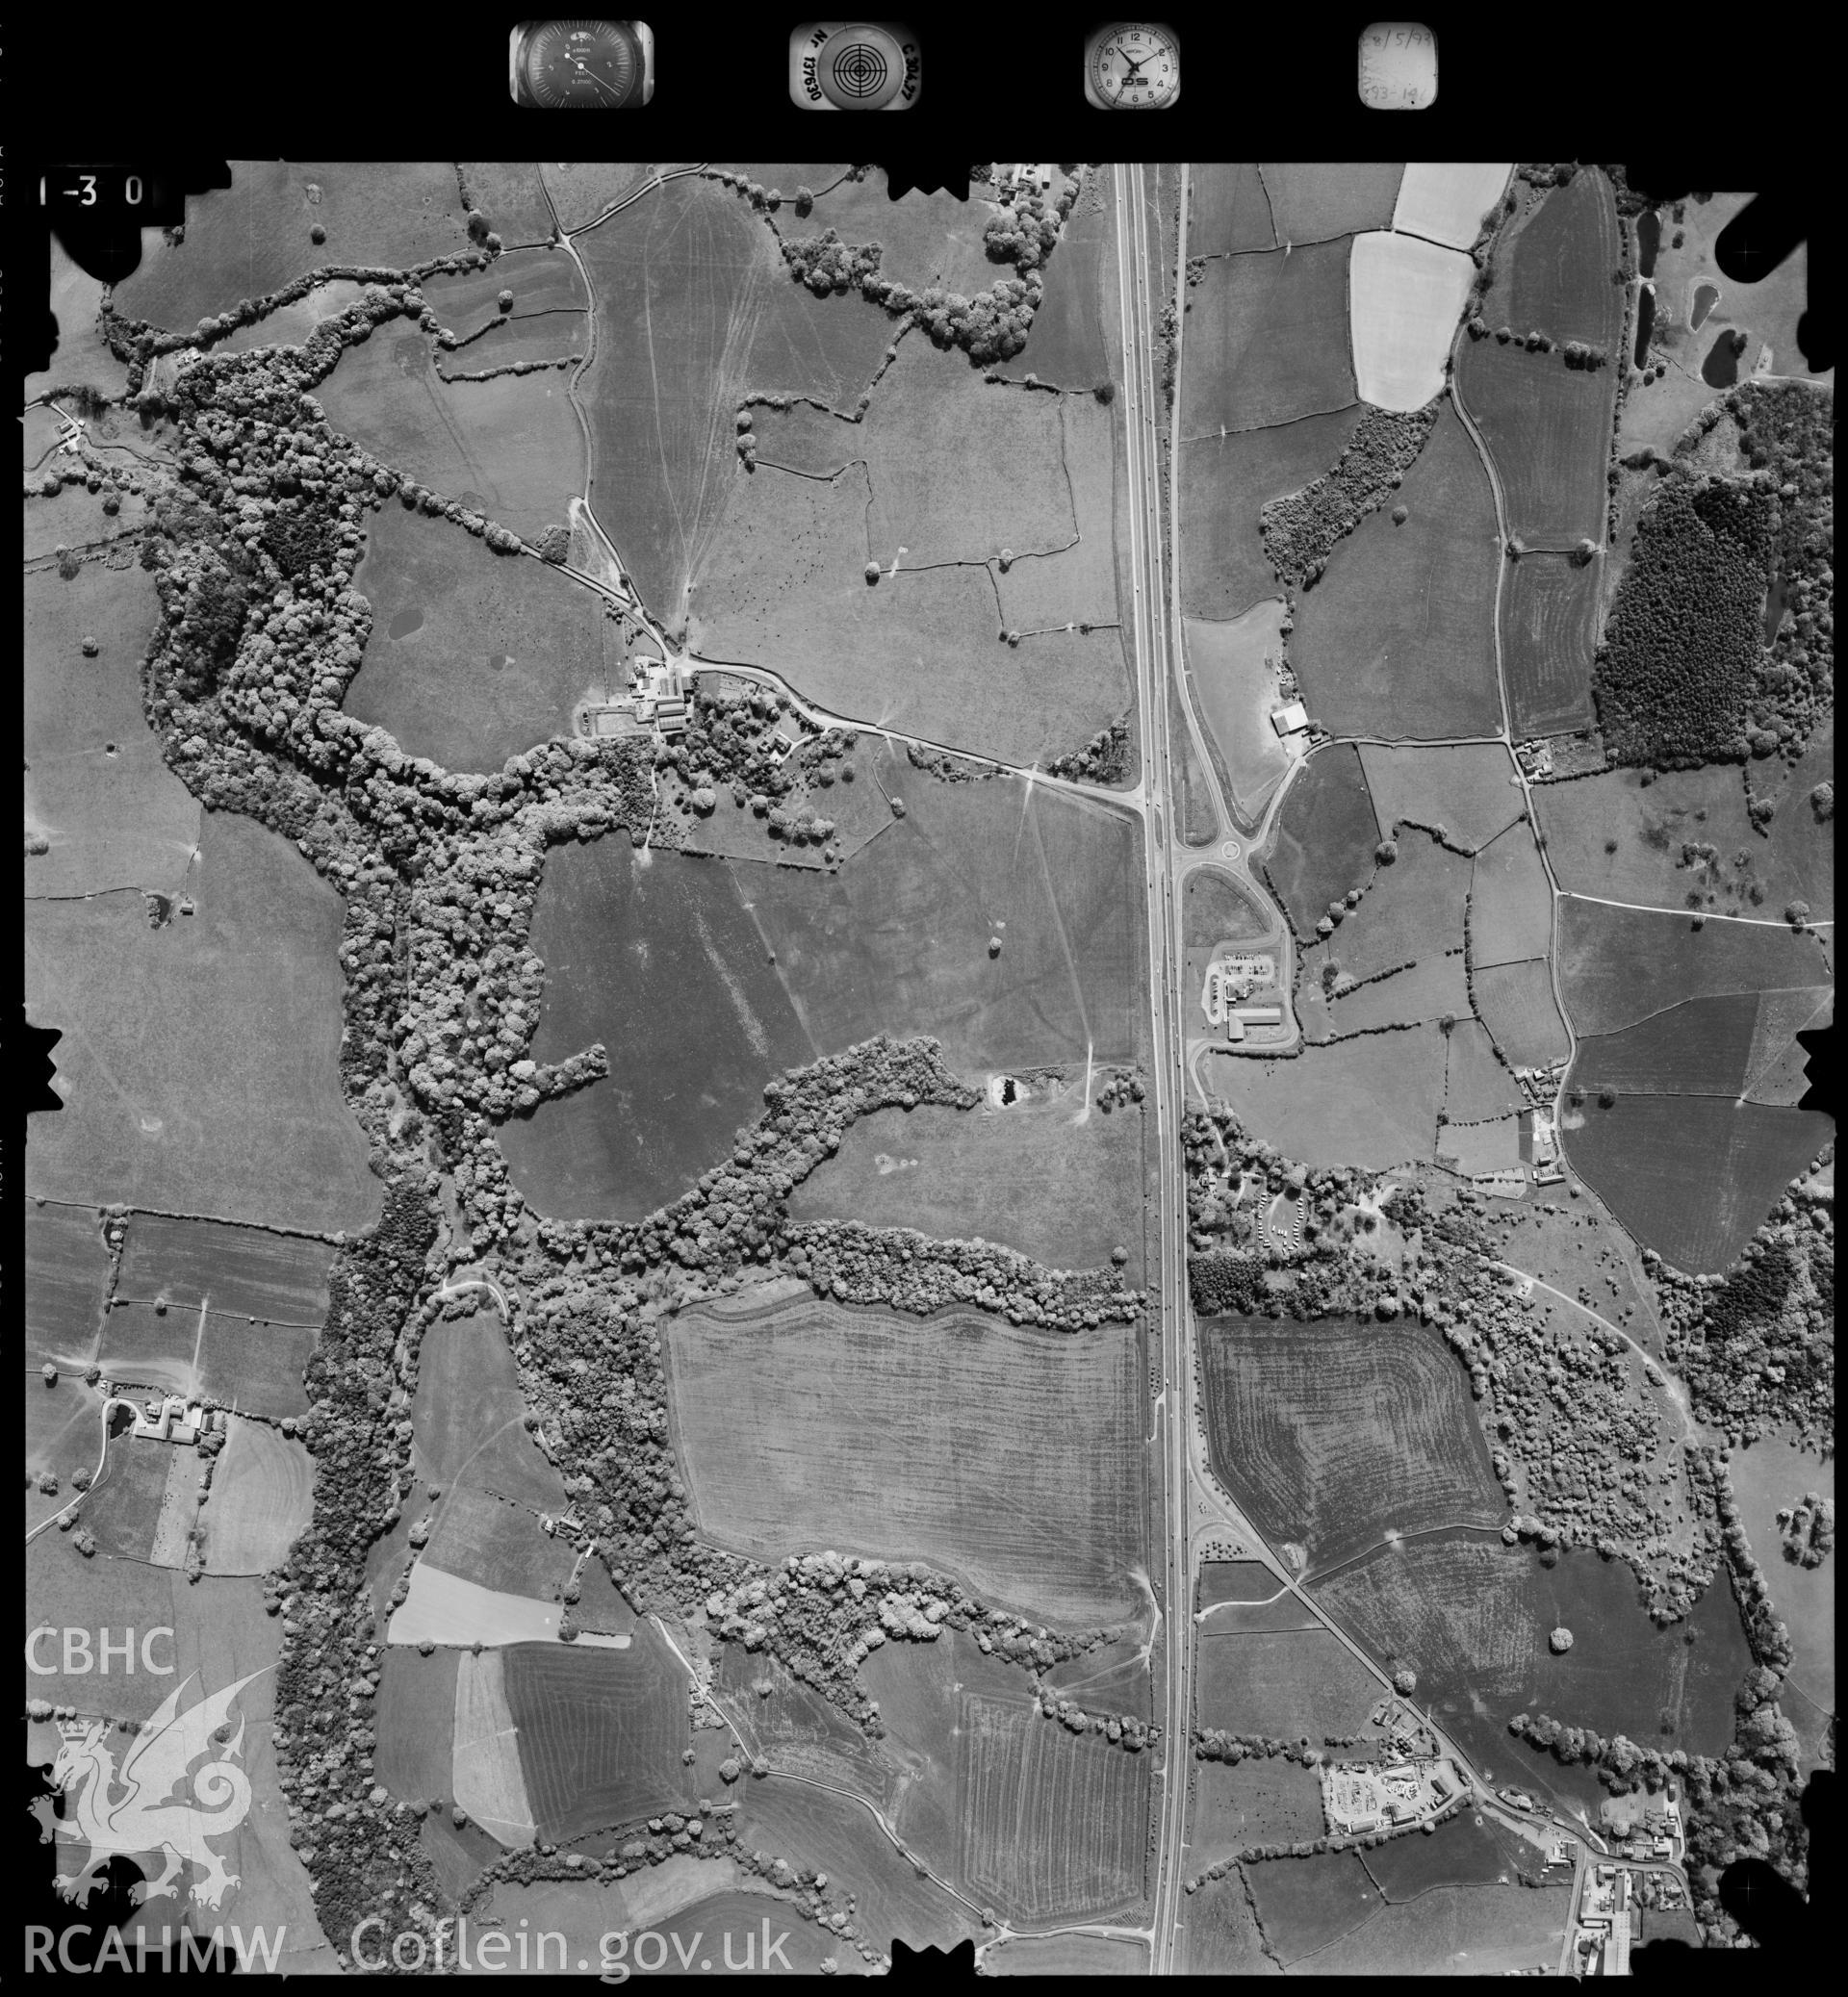 Digitized copy of an aerial photograph showing the Halkyn area, taken by Ordnance Survey, 1993.